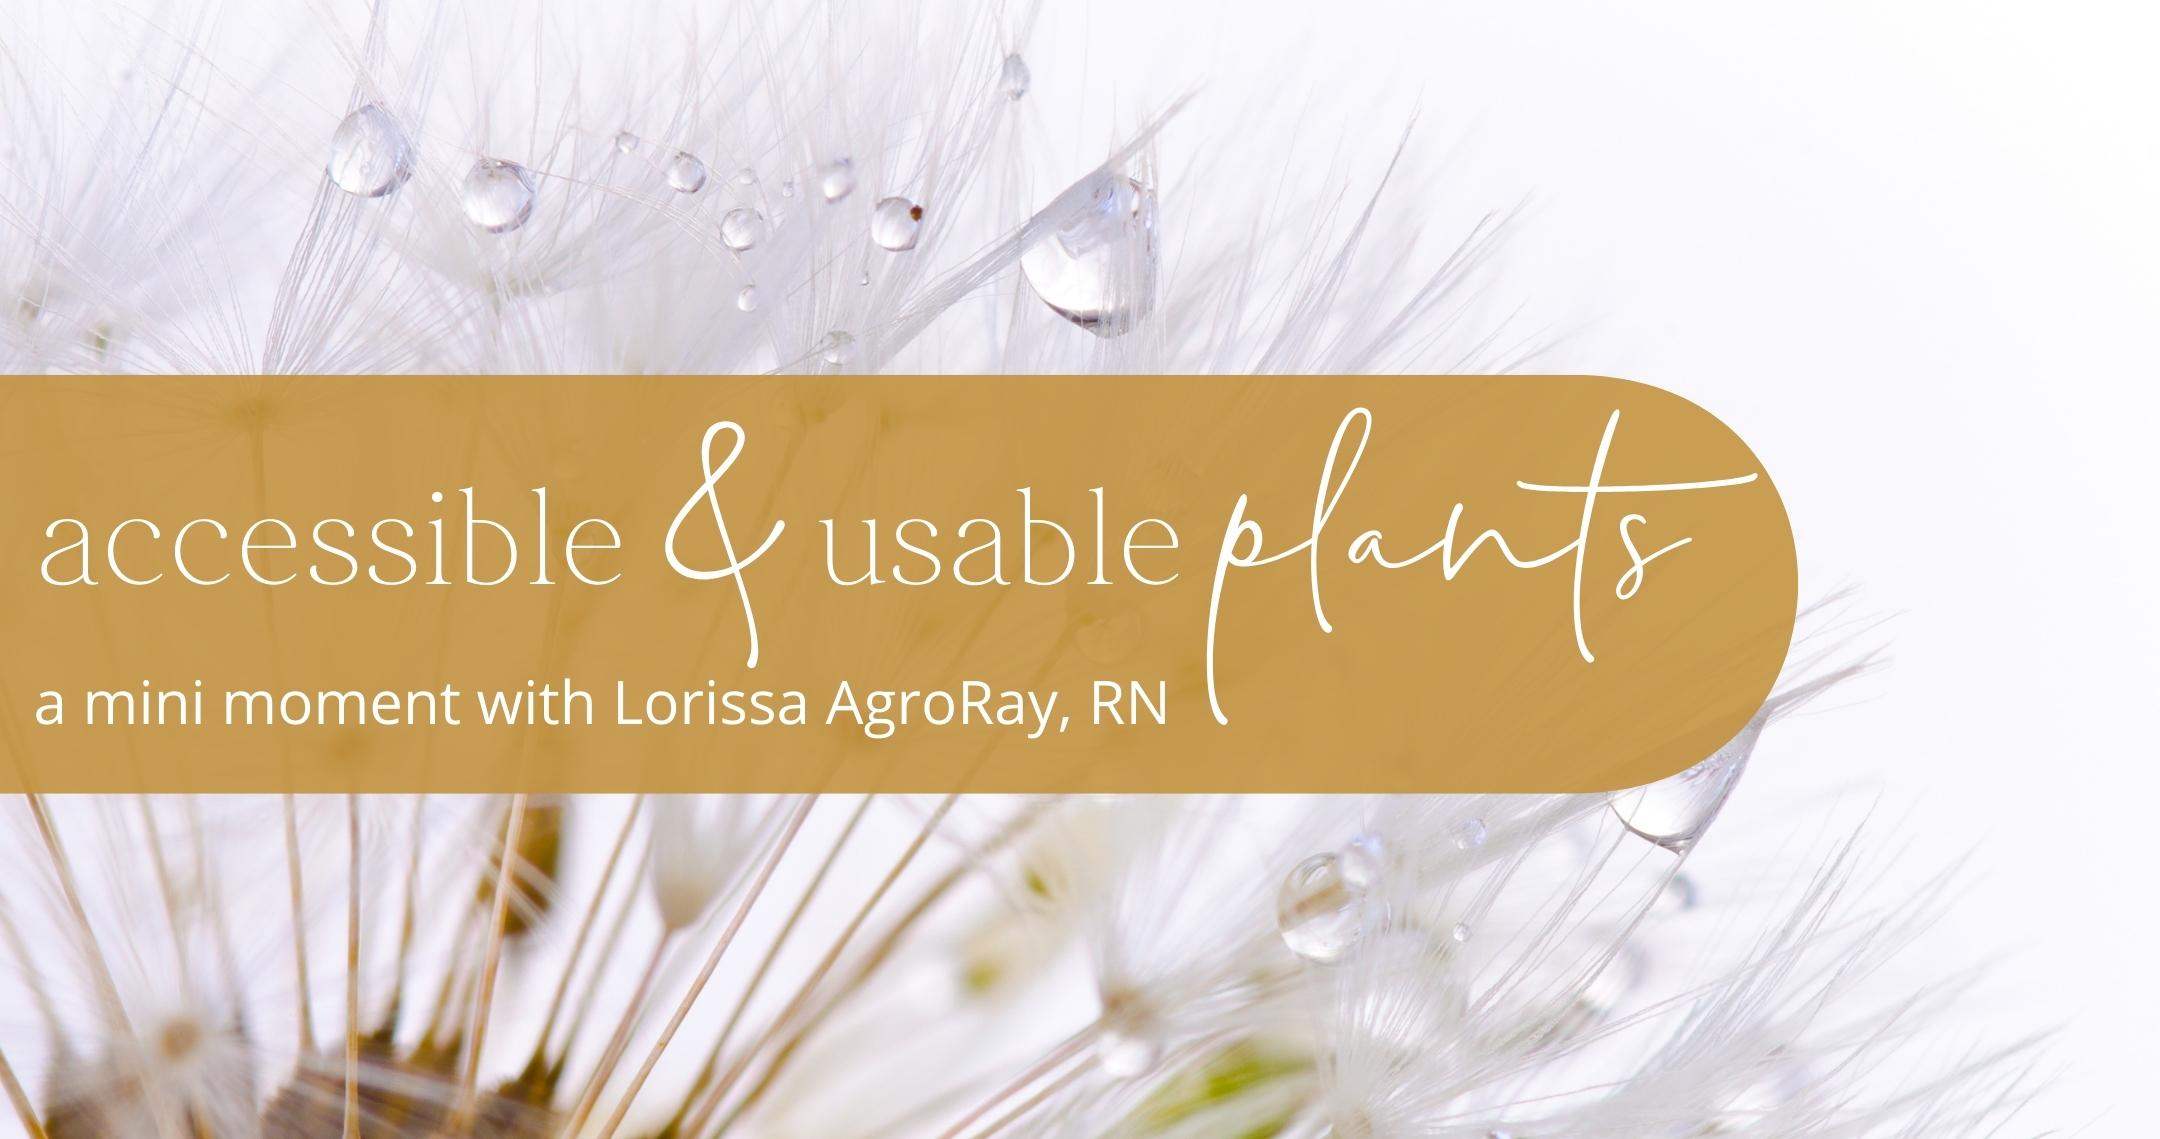 What Plants Are Accessible & Usable by the Average Person